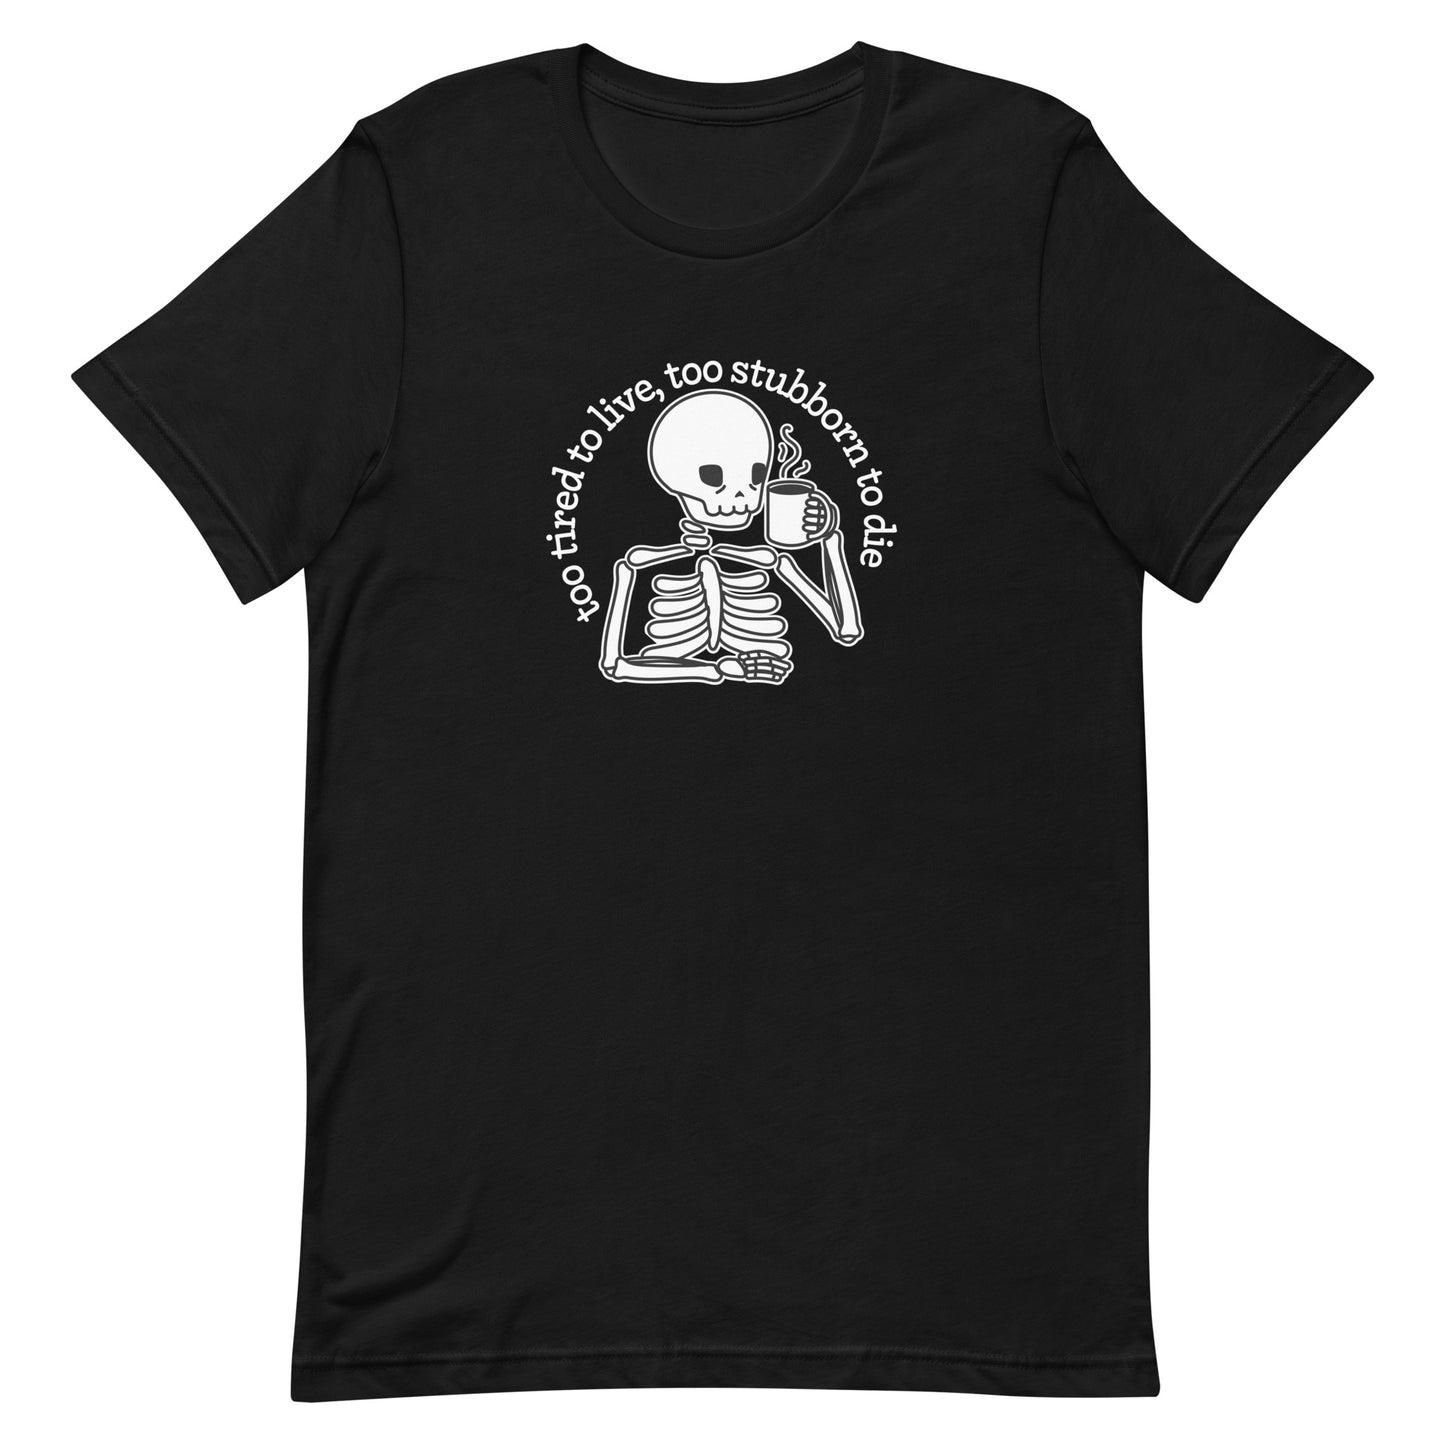 A black crewneck t-shirt featuring a tired-looking skeleton holding a steaming mug. Text in an arc above the skeleton reads "too tired to live, too stubborn to die".